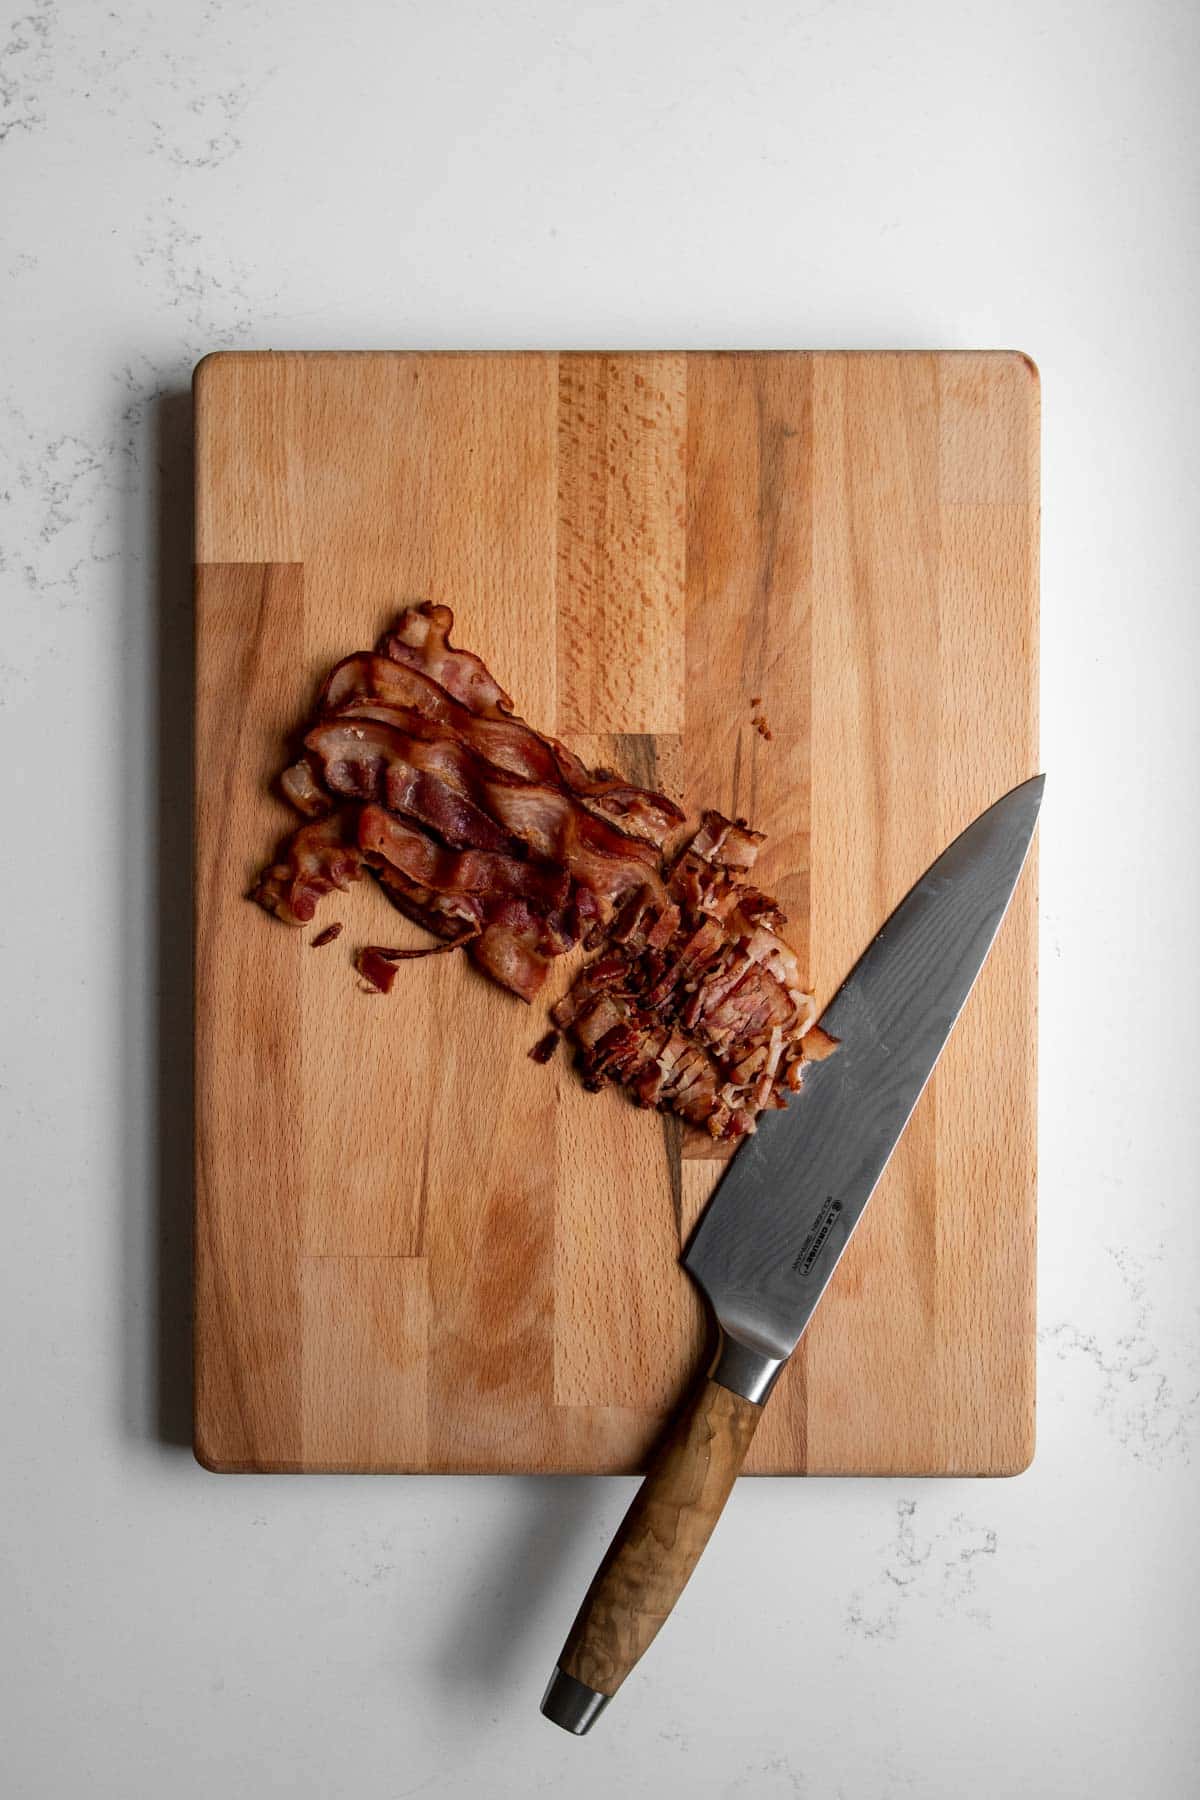 Cooked bacon on a cutting board with a knife.